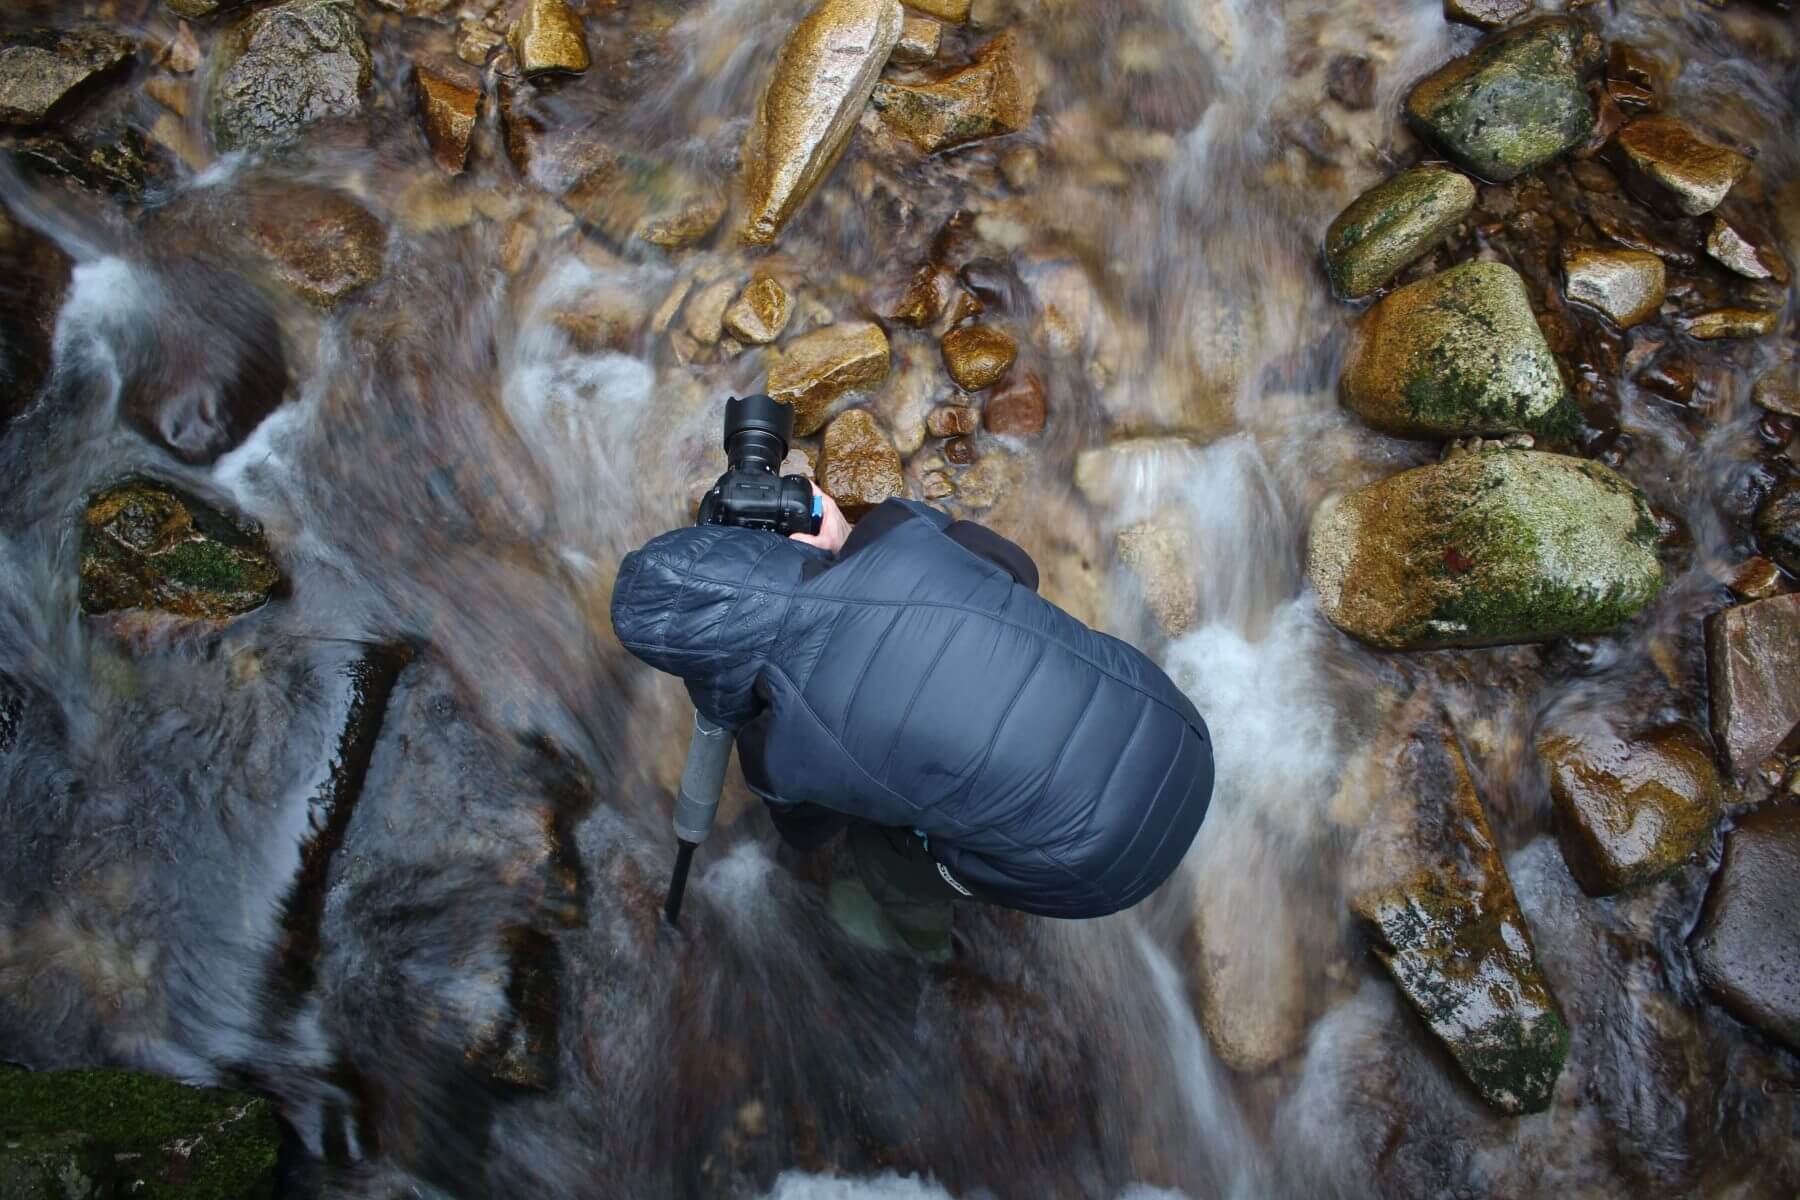 How To Keep Your Gear Dry